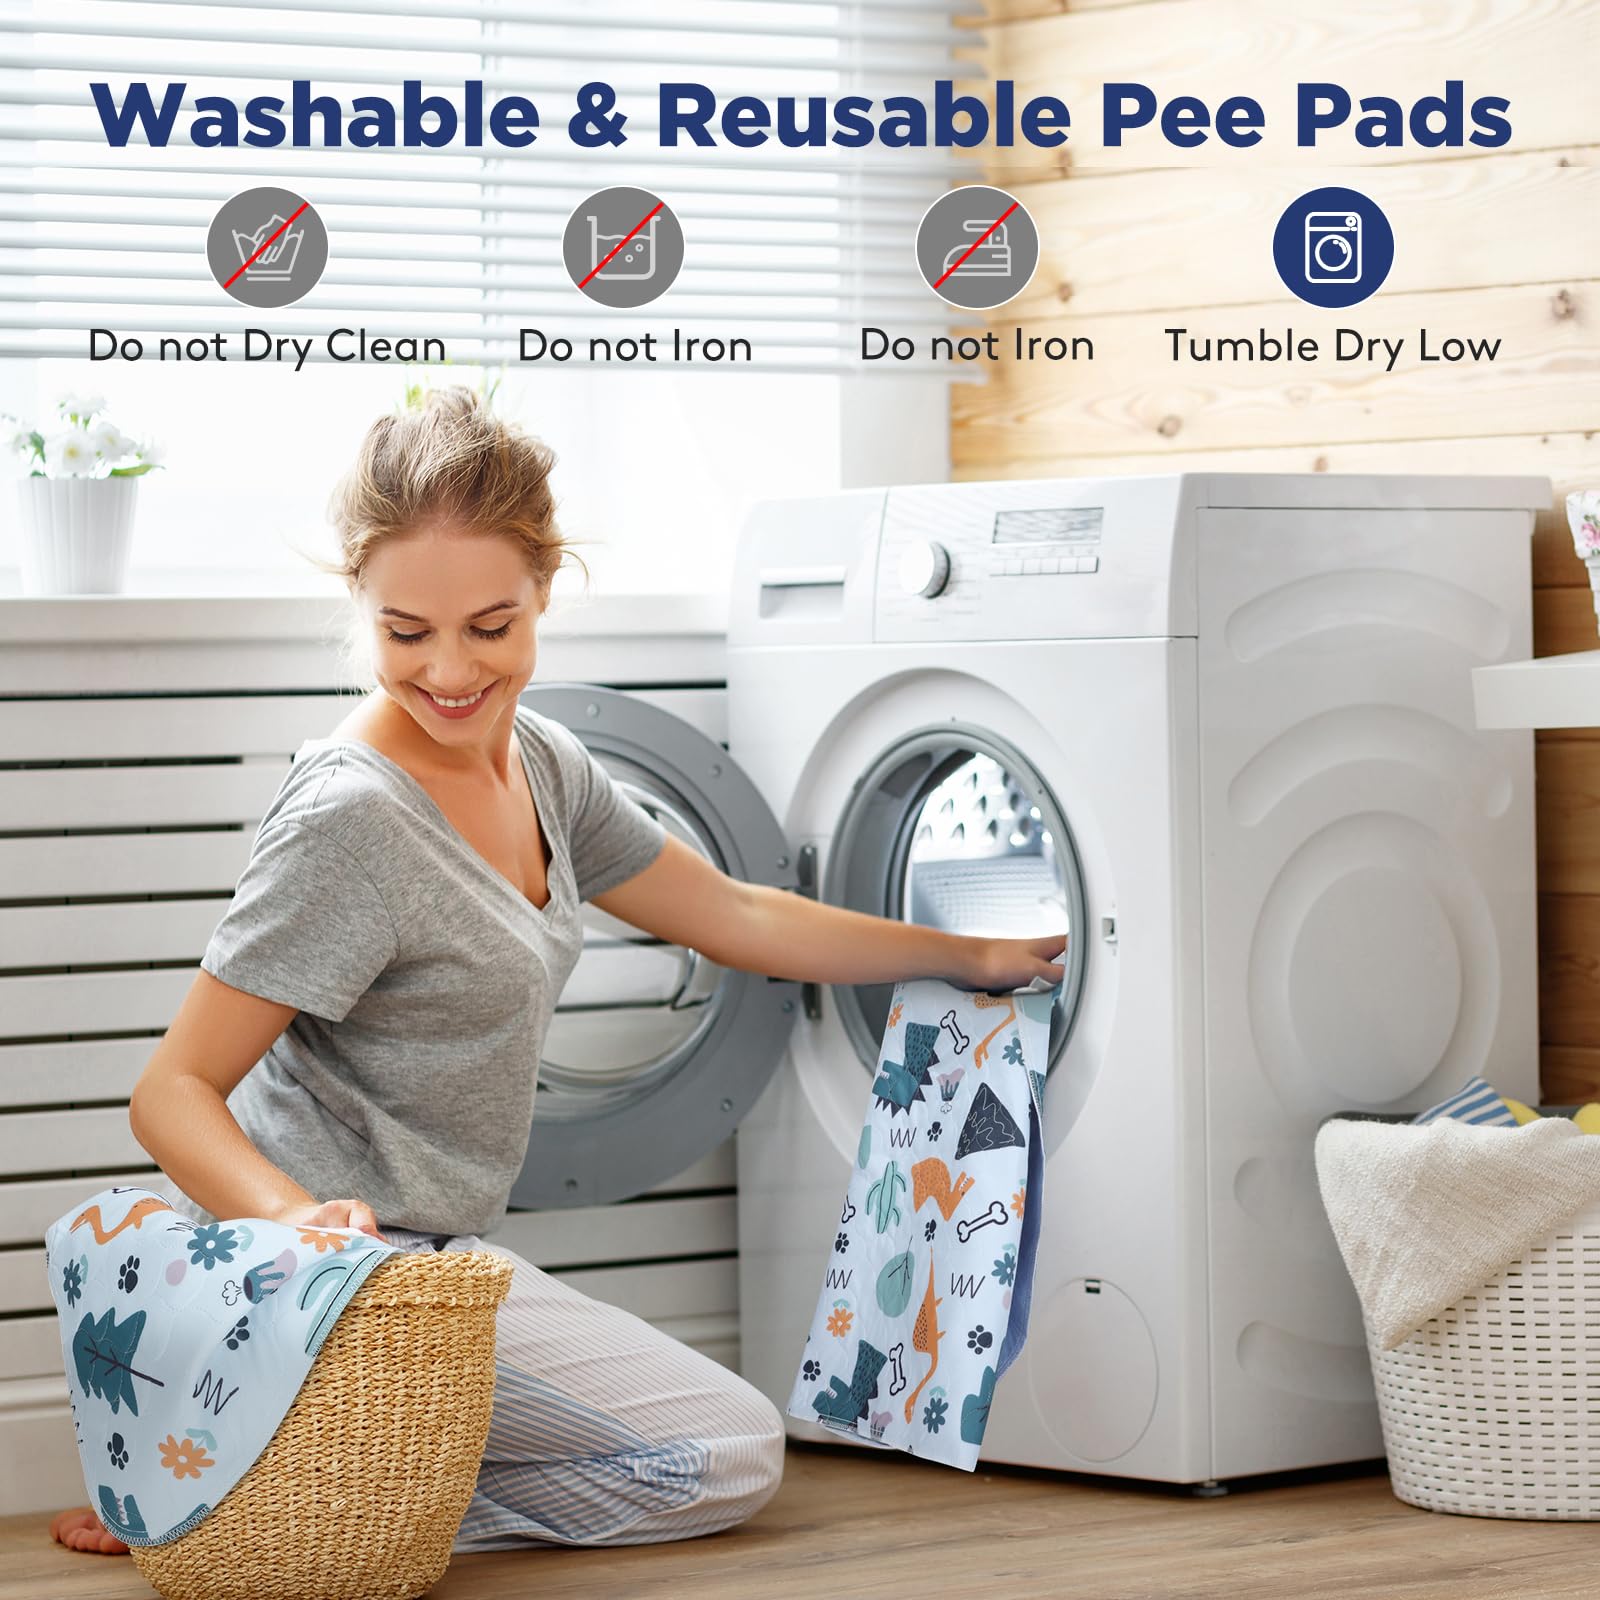 Washable Pee Pads for Dogs, 2 Pack Small 18"x24" Super Absorbent Reusable Puppy Pads Pet Training Pads, 100% Waterproof Non-Slip Puppy Pee Pads Whelping Dog Playpen Crate Potty Pads Puppy Essentials